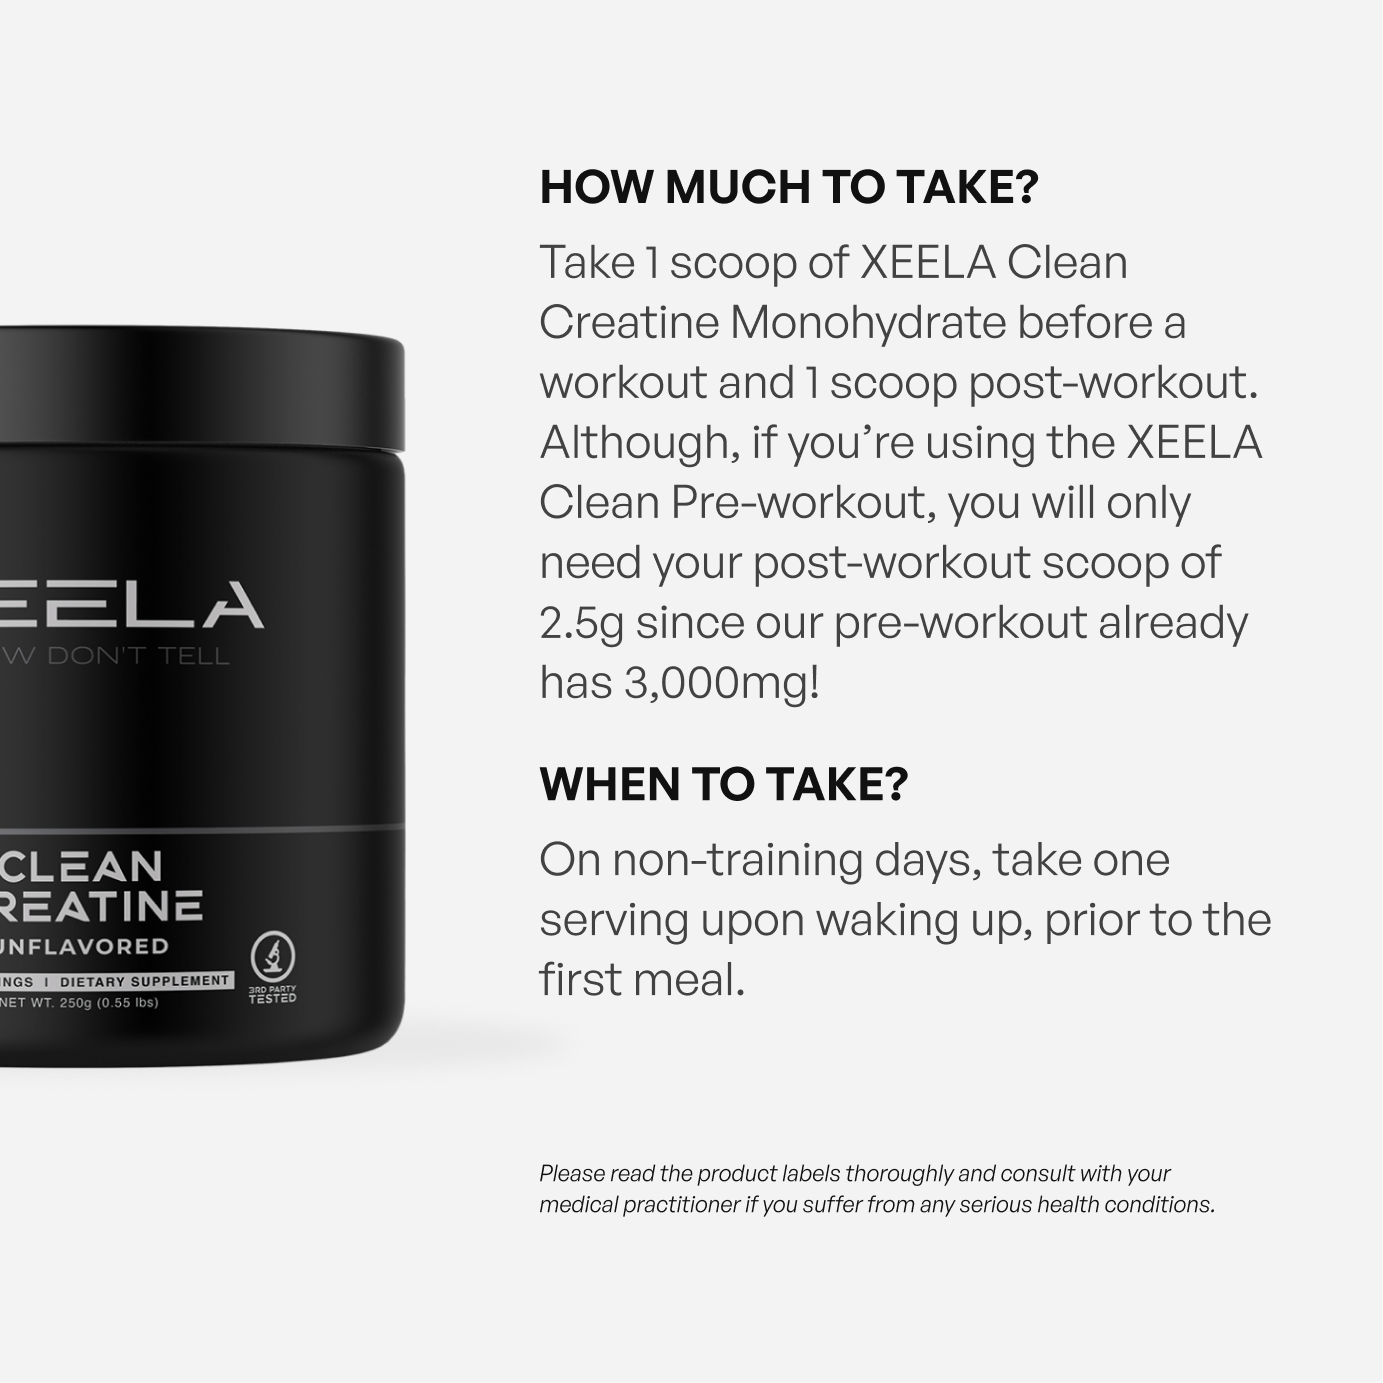 XEELA Pre Workout - Clean & Tested - Jitter Free, Safe, and Natural - Increase Thermogenic Energy, Focus, and Endurance w/Creatine, Organic Caffeine